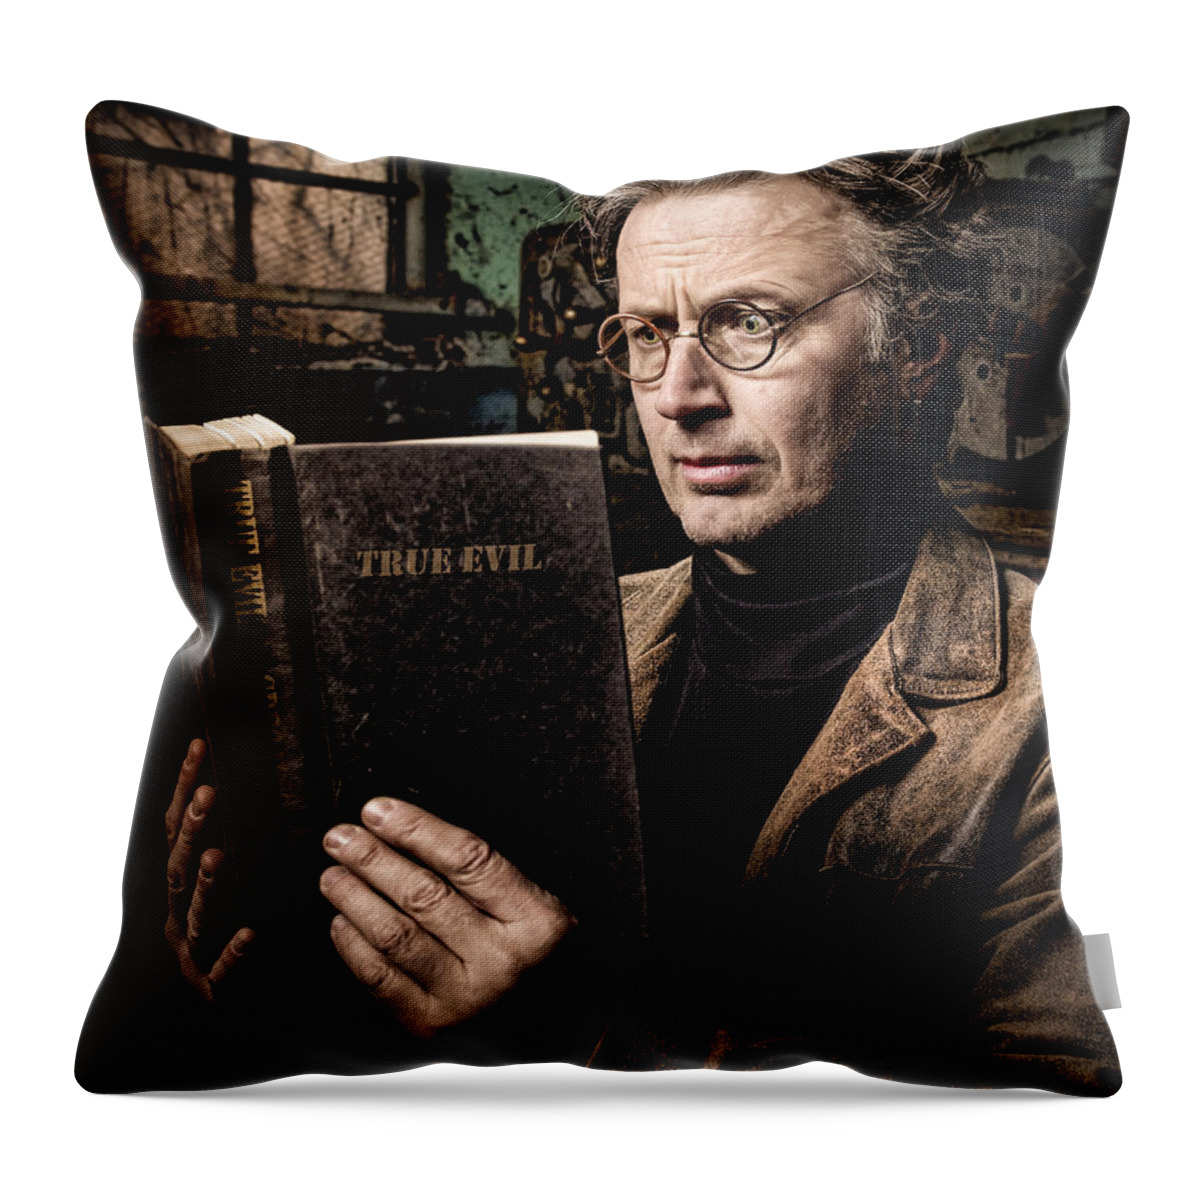 Evil Throw Pillow featuring the photograph True Evil - Science Fiction - Horror by Gary Heller